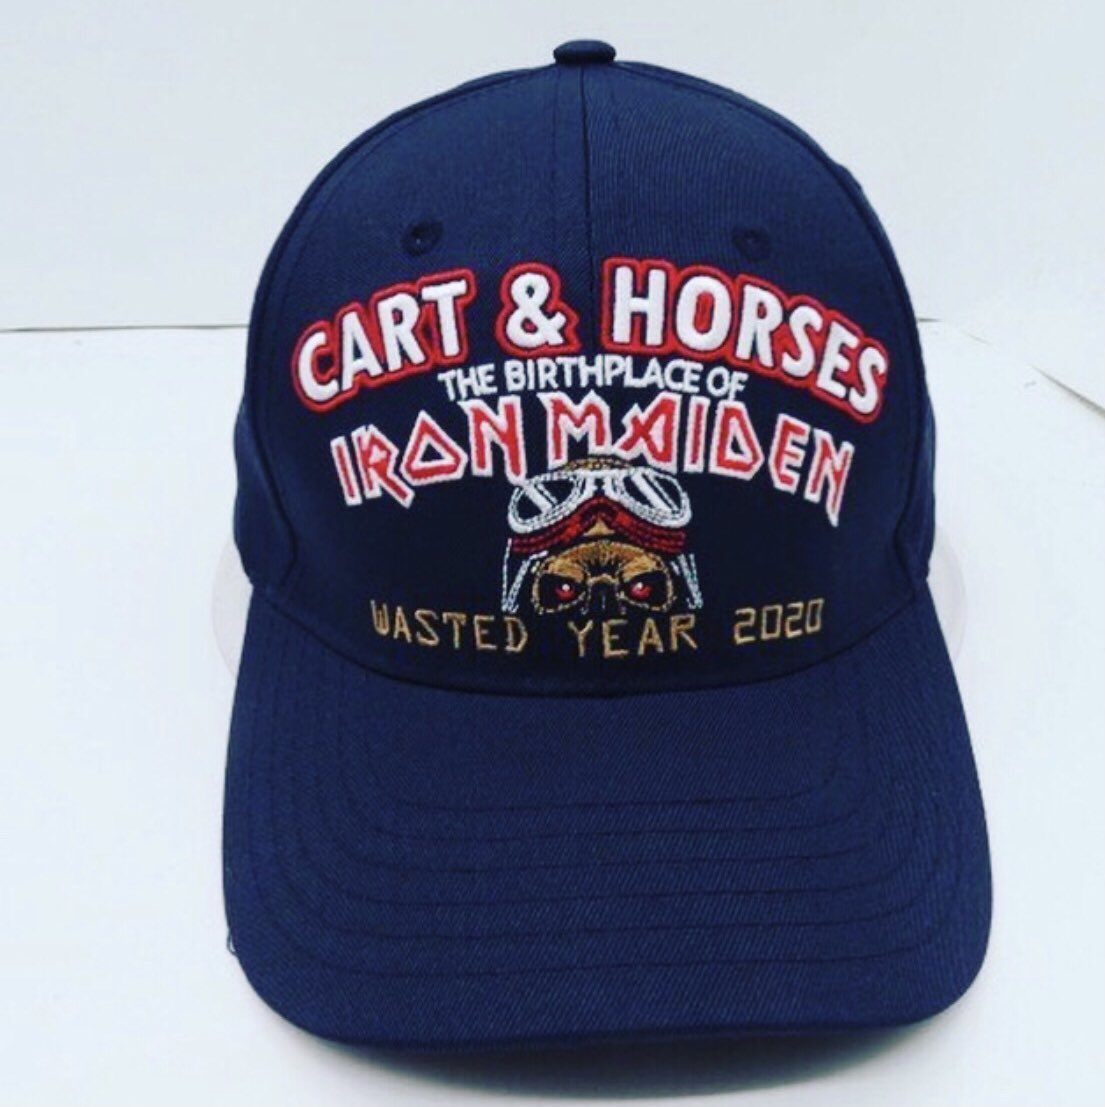 Cart & Horses wasted year 2020 baseball hat 🧢 now in stock cartandhorses.london #IronMaiden #London #stratford #Maryland #E15 #maiden #England #hat